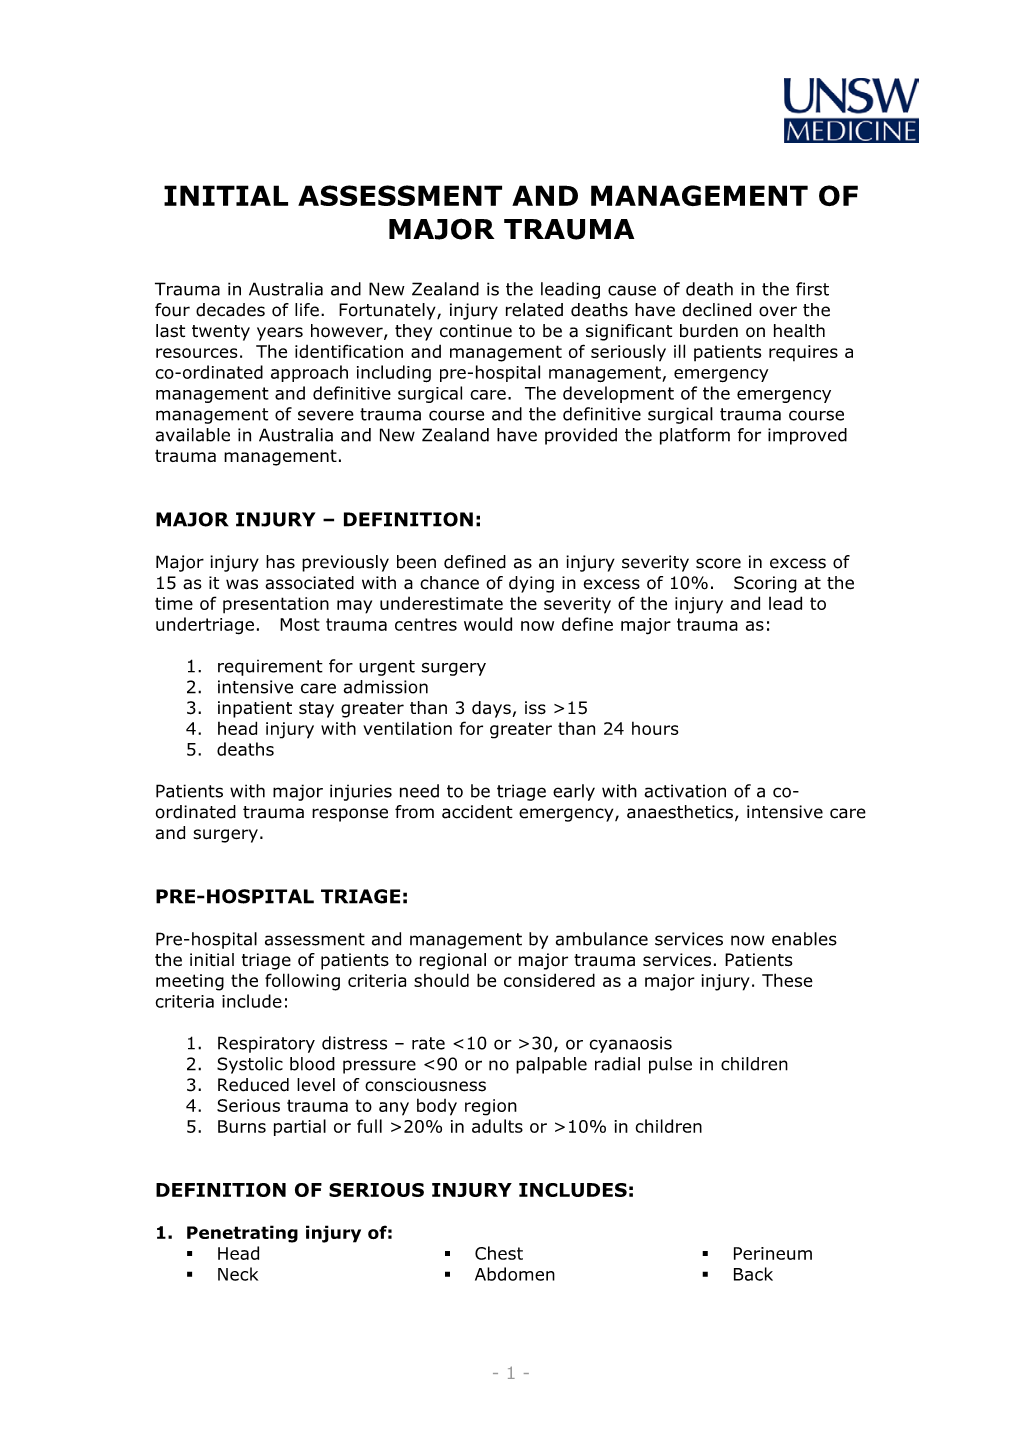 Initial Assessment and Management of Major Trauma